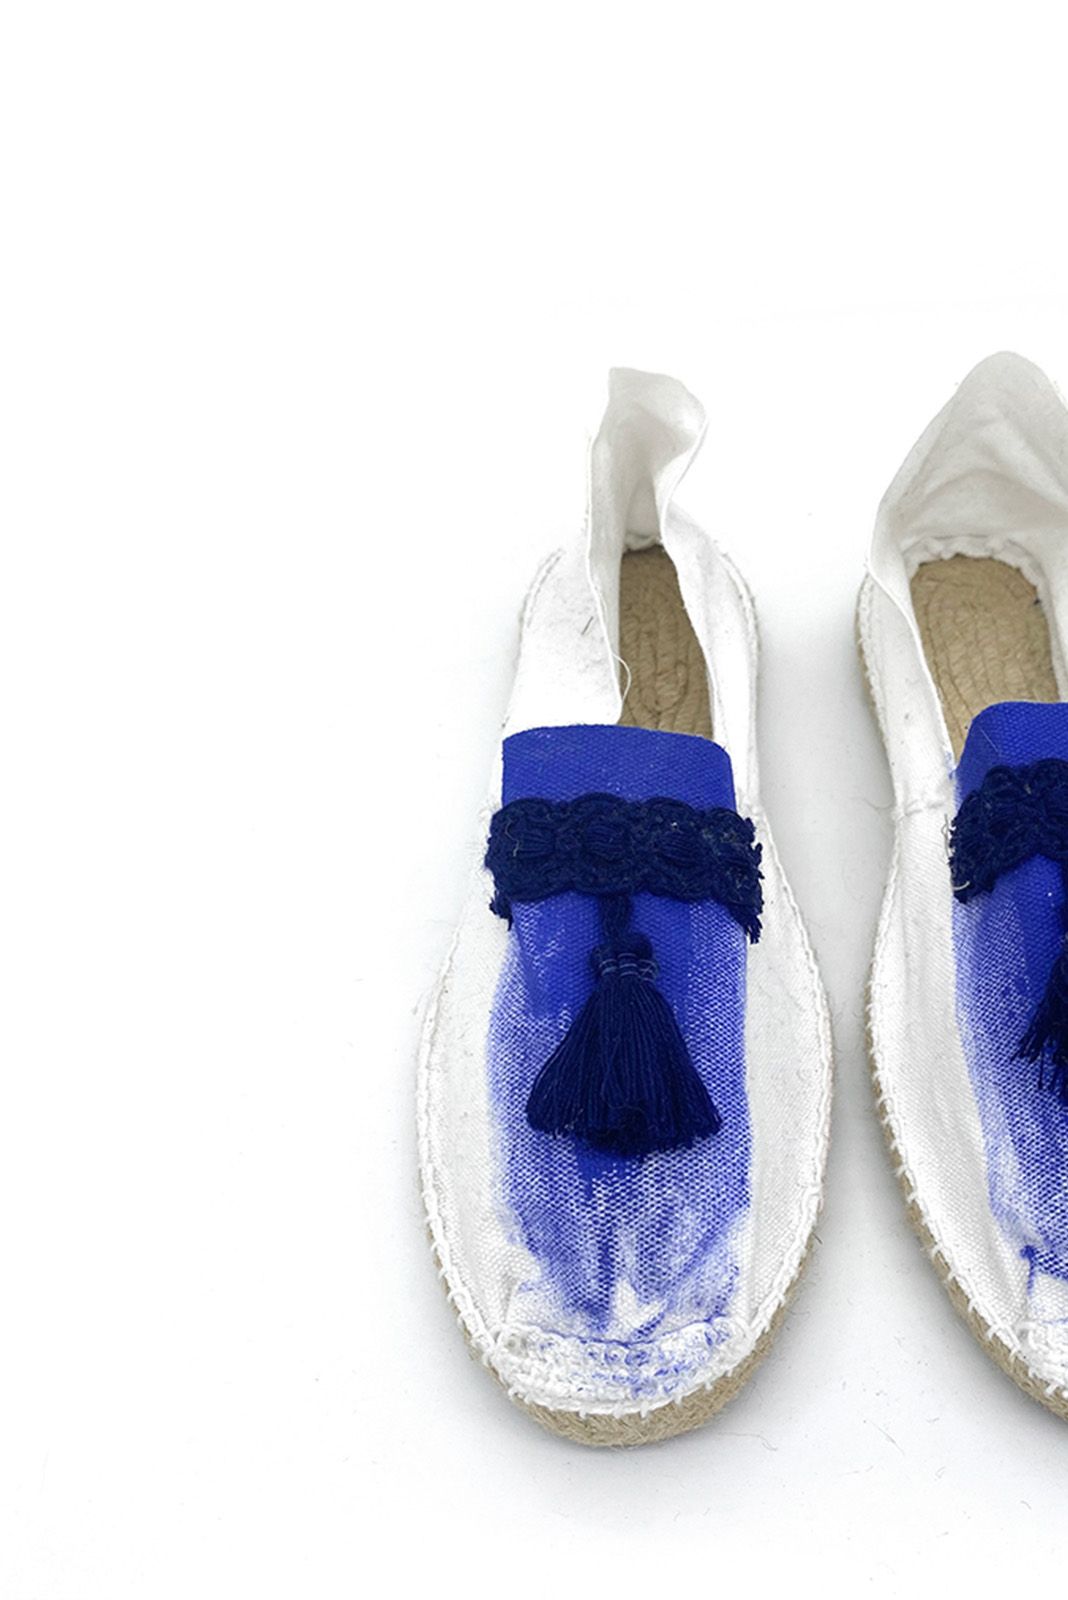 White espadrilles with paintbrush and blue tassels